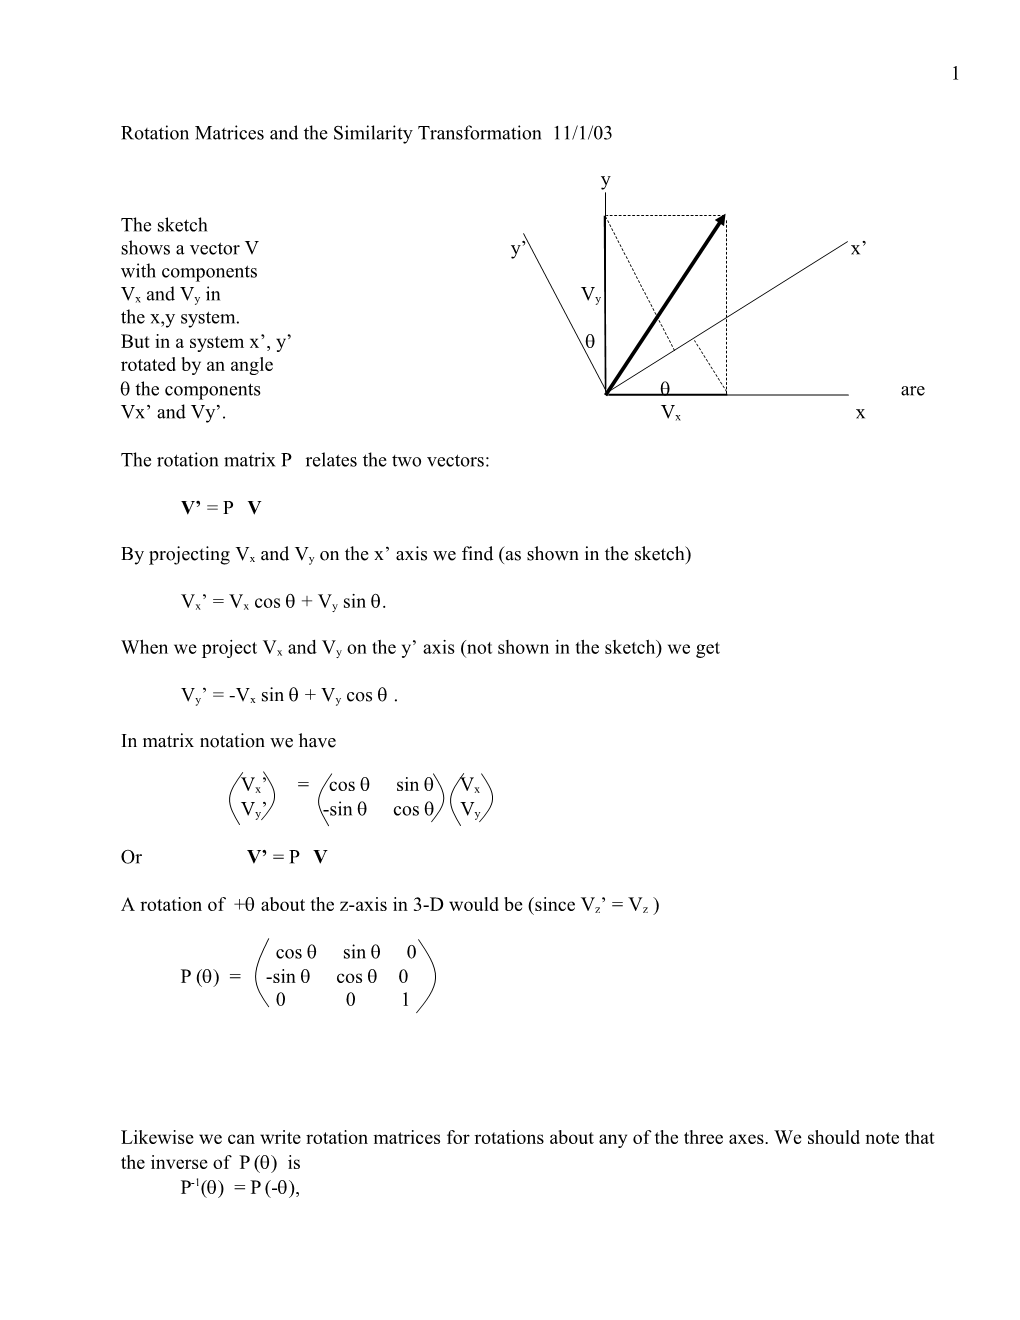 Rotation Matrices and the Similarity Transformation 11/1/03